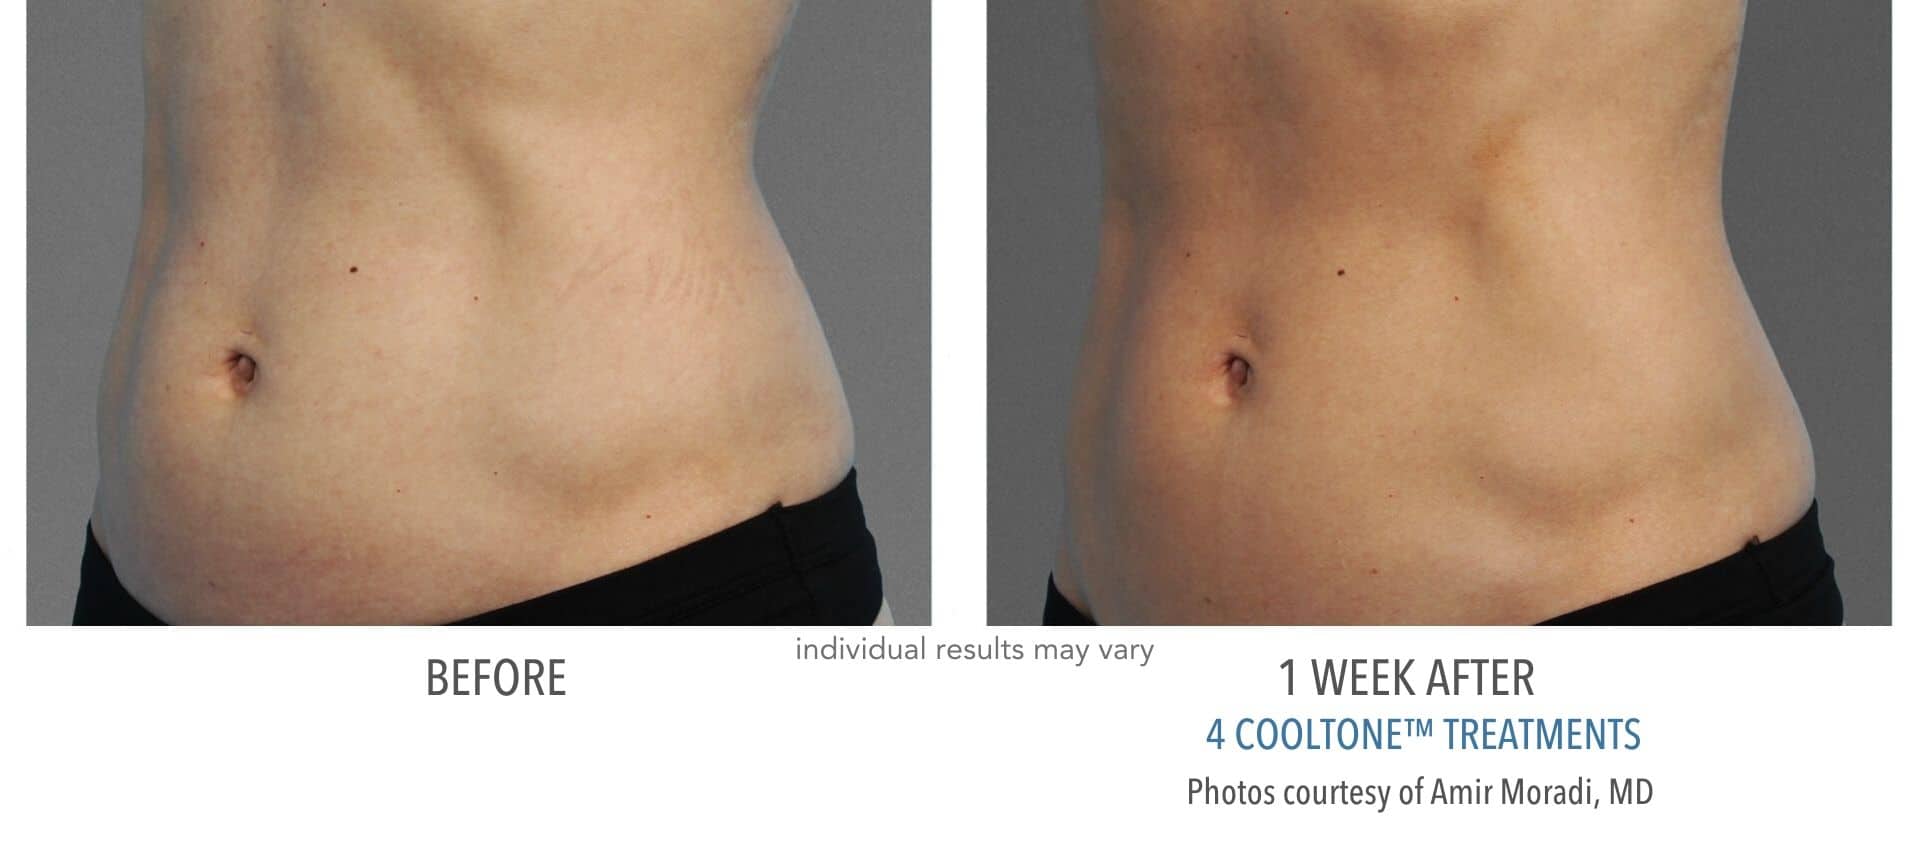 Womans abdomen before and after cooltone at advanced rejuvenation centers.